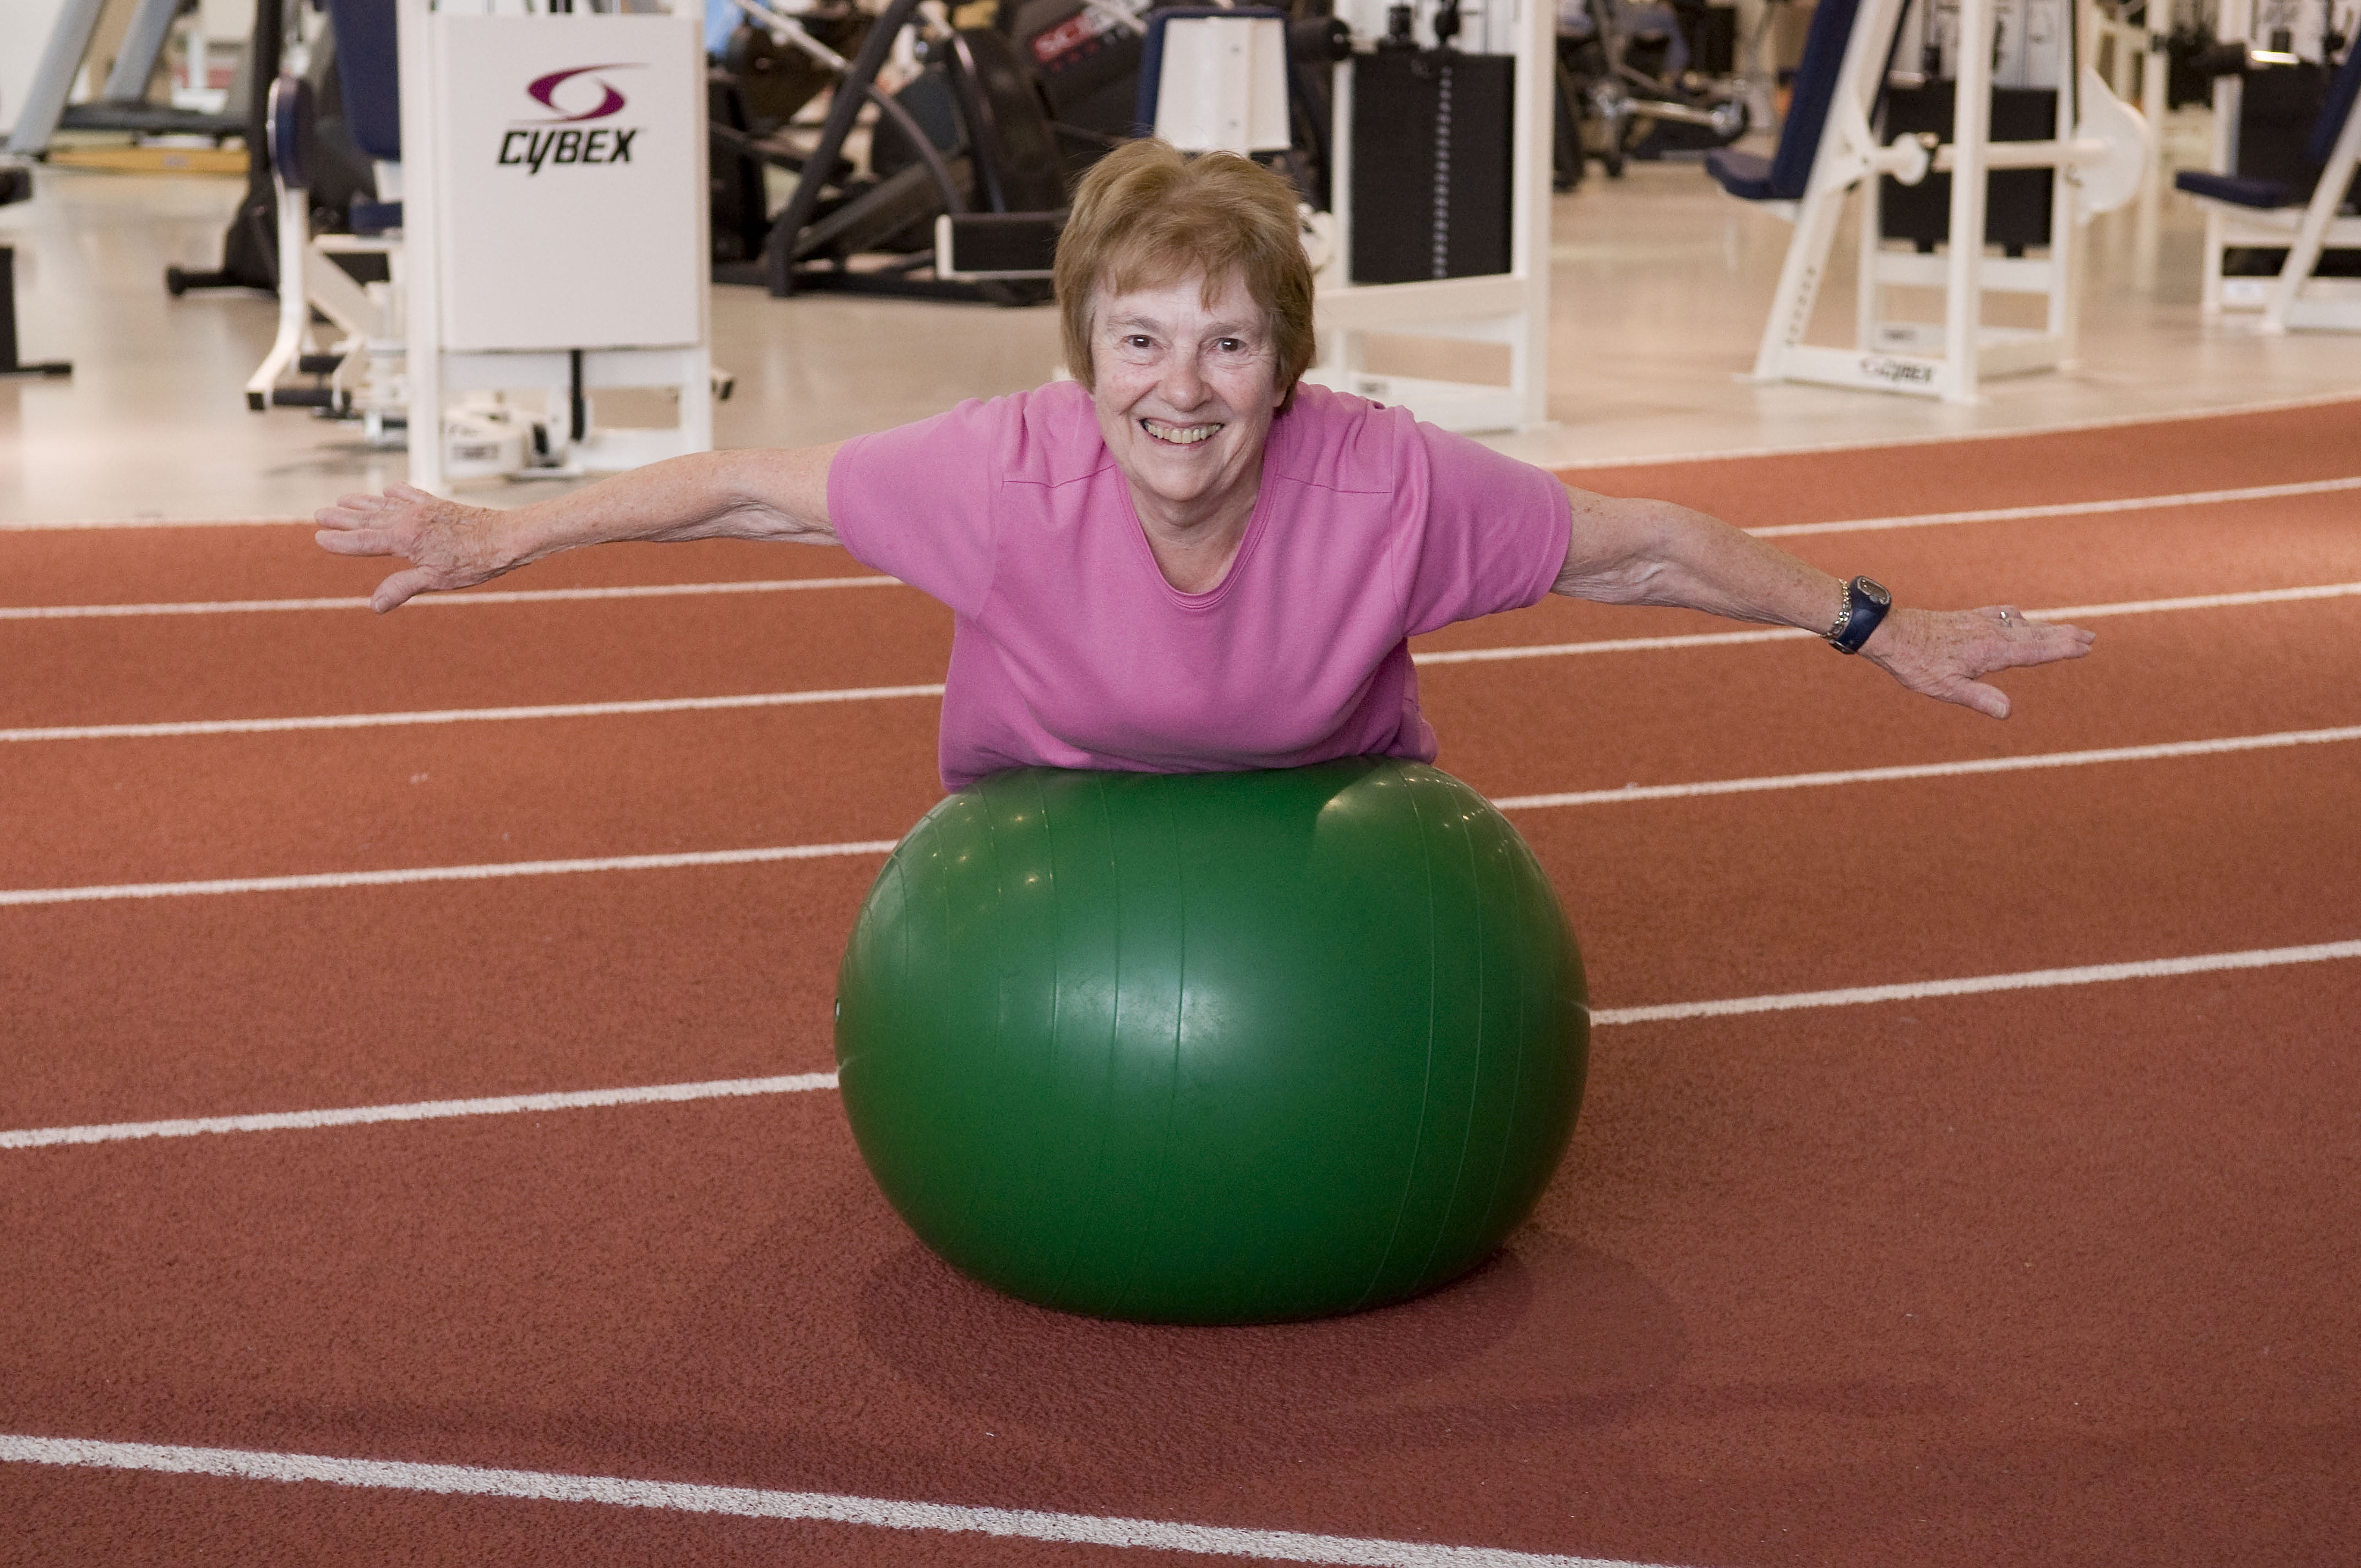 Participant on stability ball